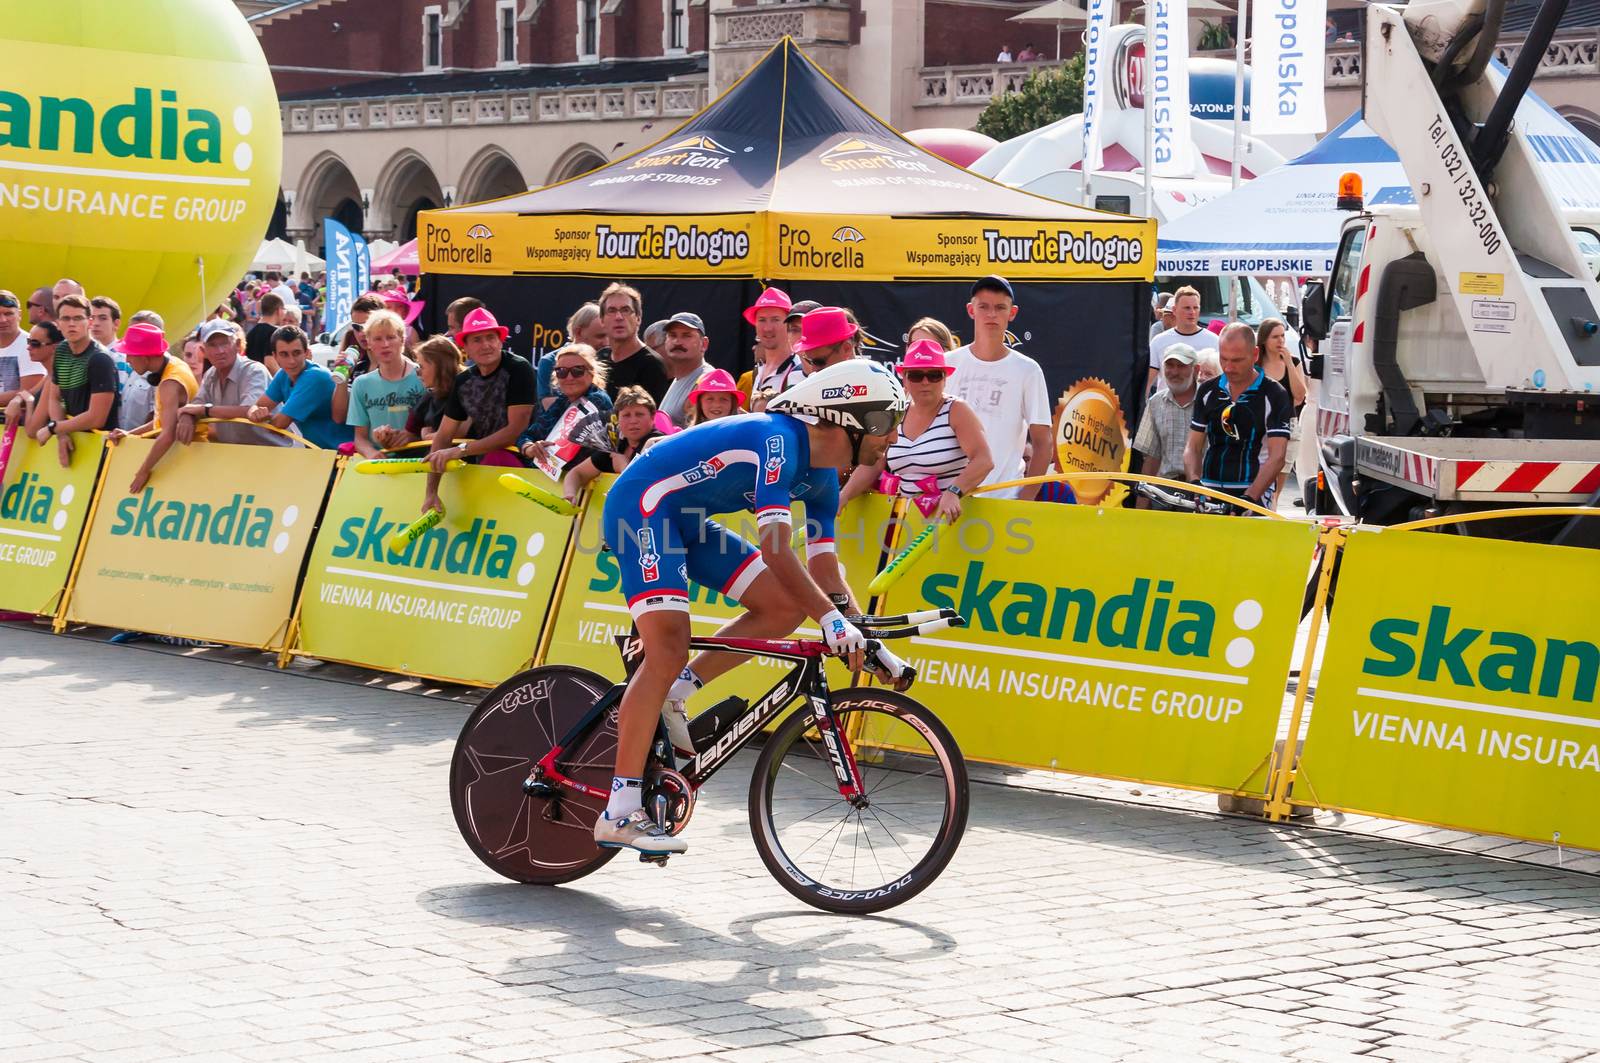 Final stage of Tour de Pologne in Krakow by mkos83